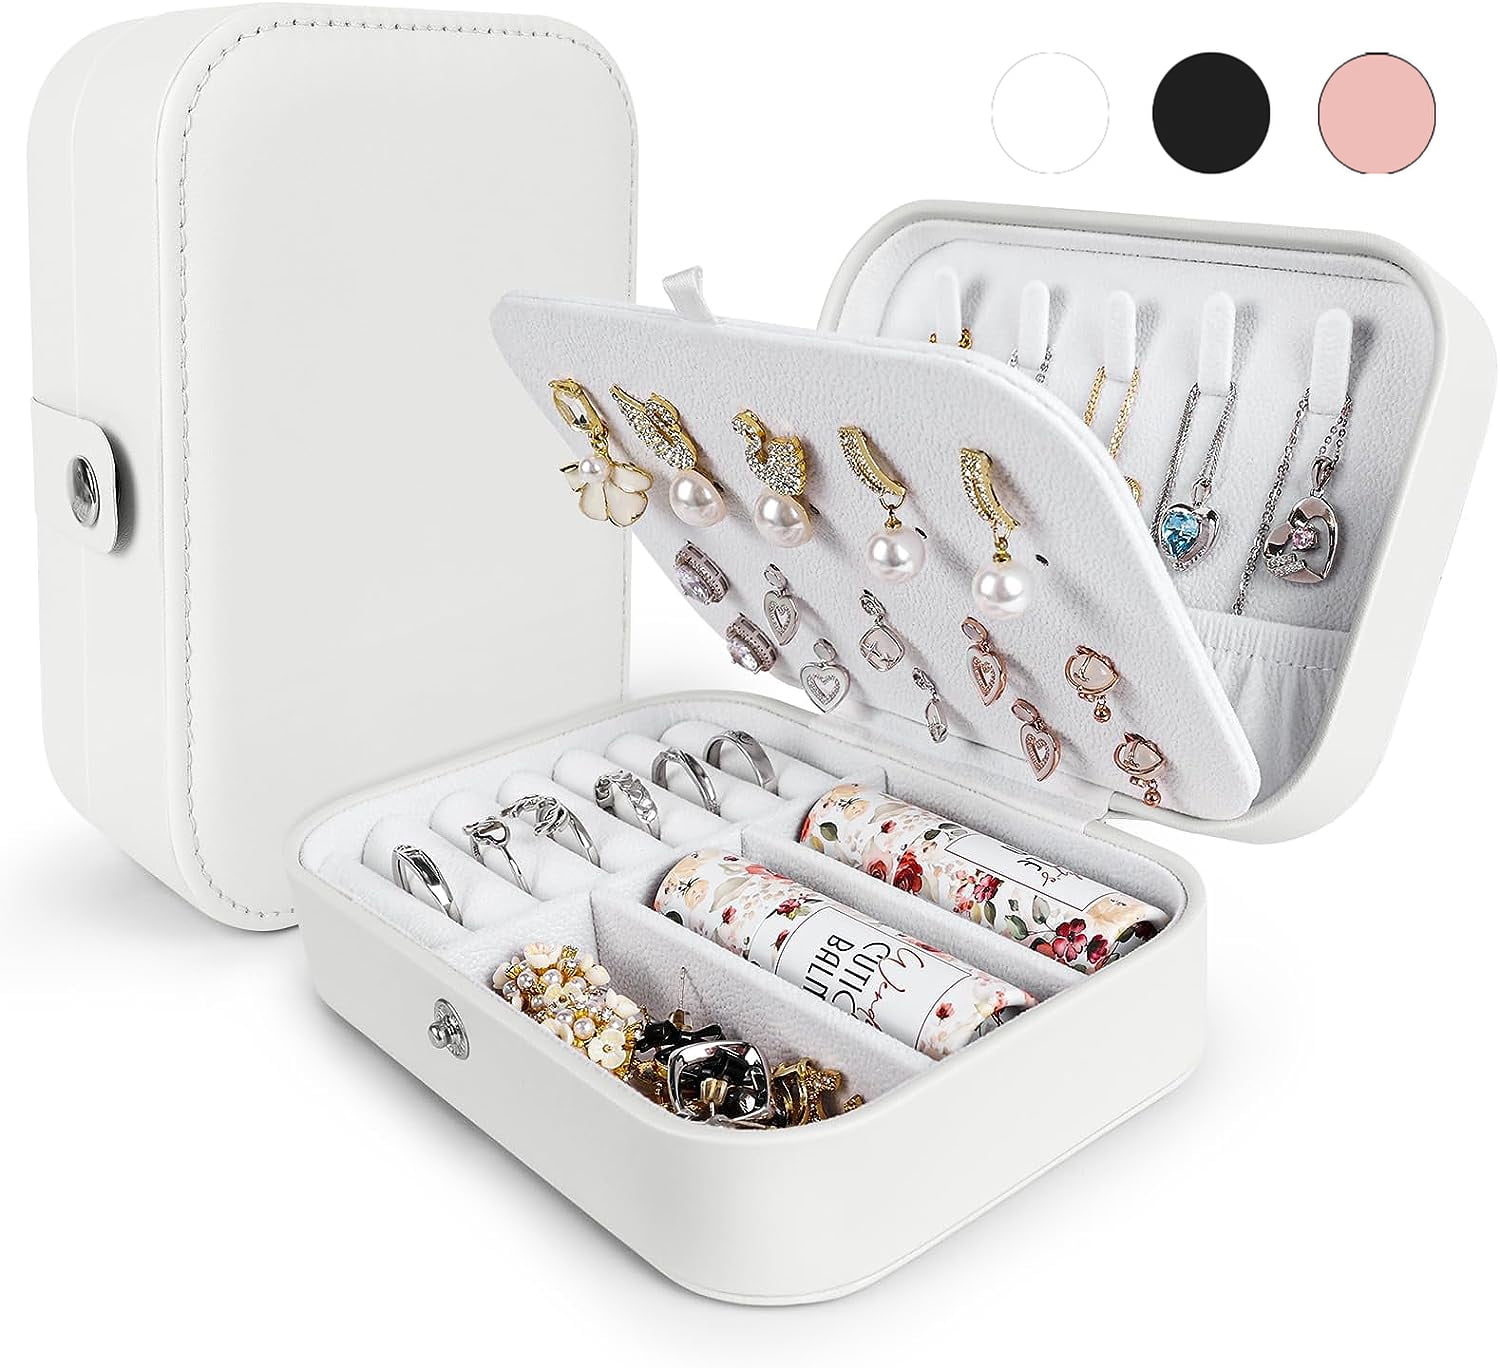 Keep your jewelry safe and secure with the best jewelry boxes. - CNET